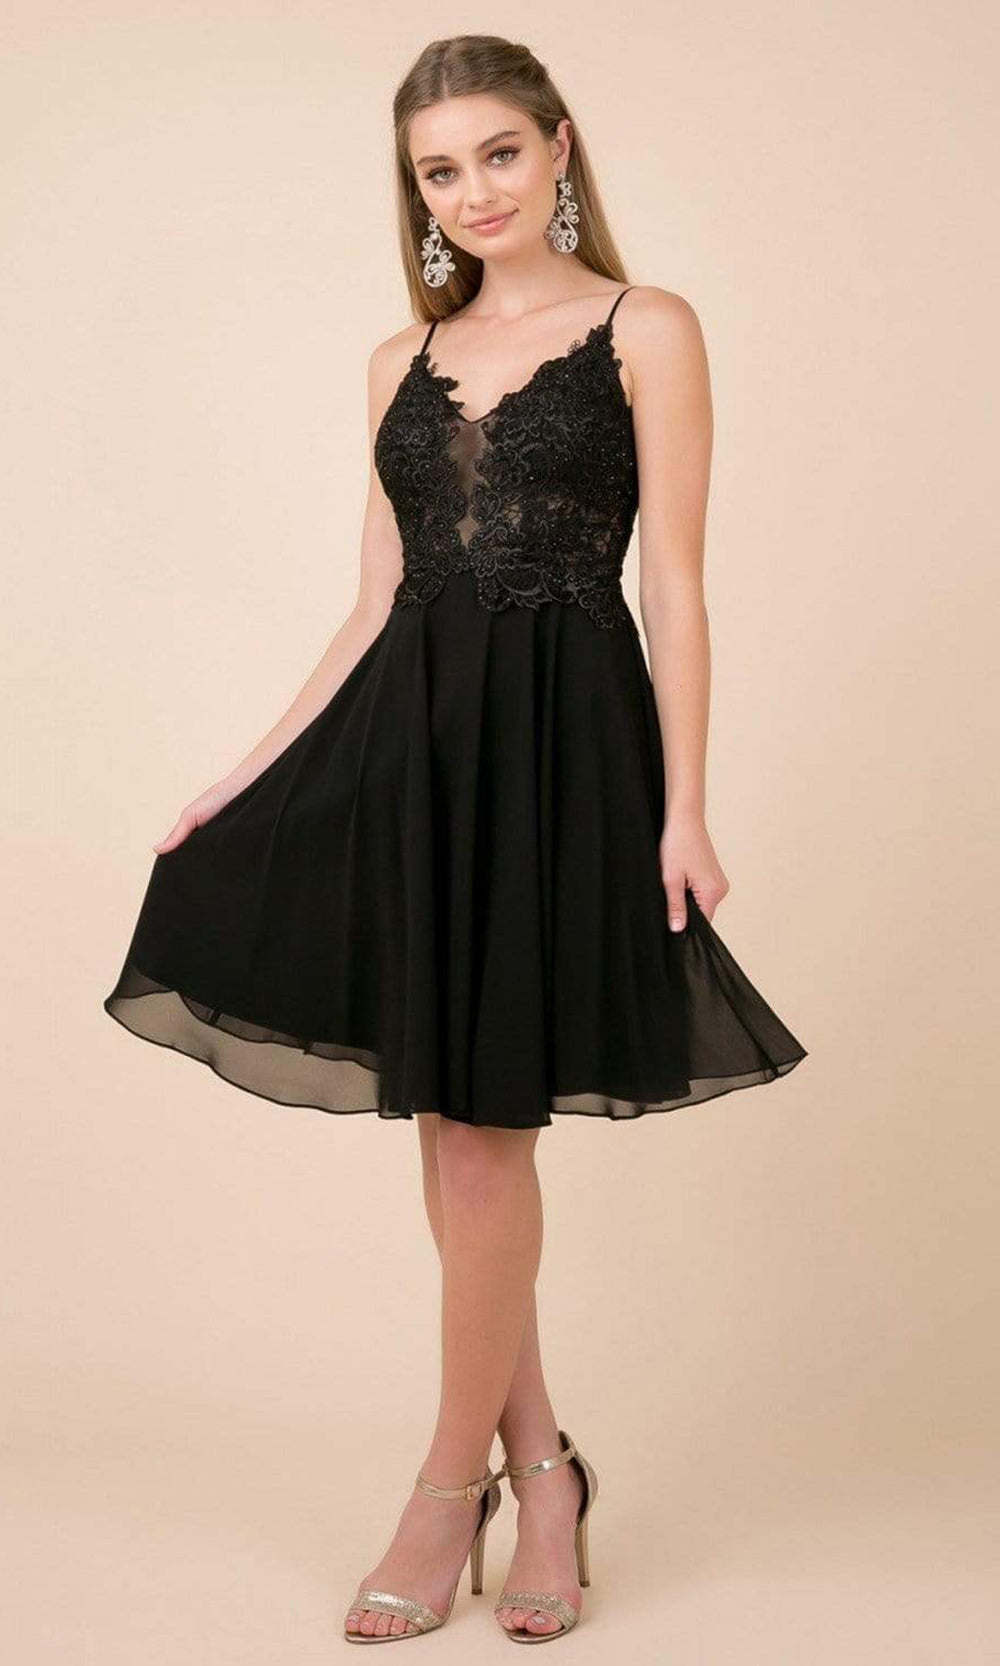 Nox Anabel - Spaghetti Strap Beaded Lace A-line Dress A660 - 1 pc Black In Size 2XL Available CCSALE 2XL / Black